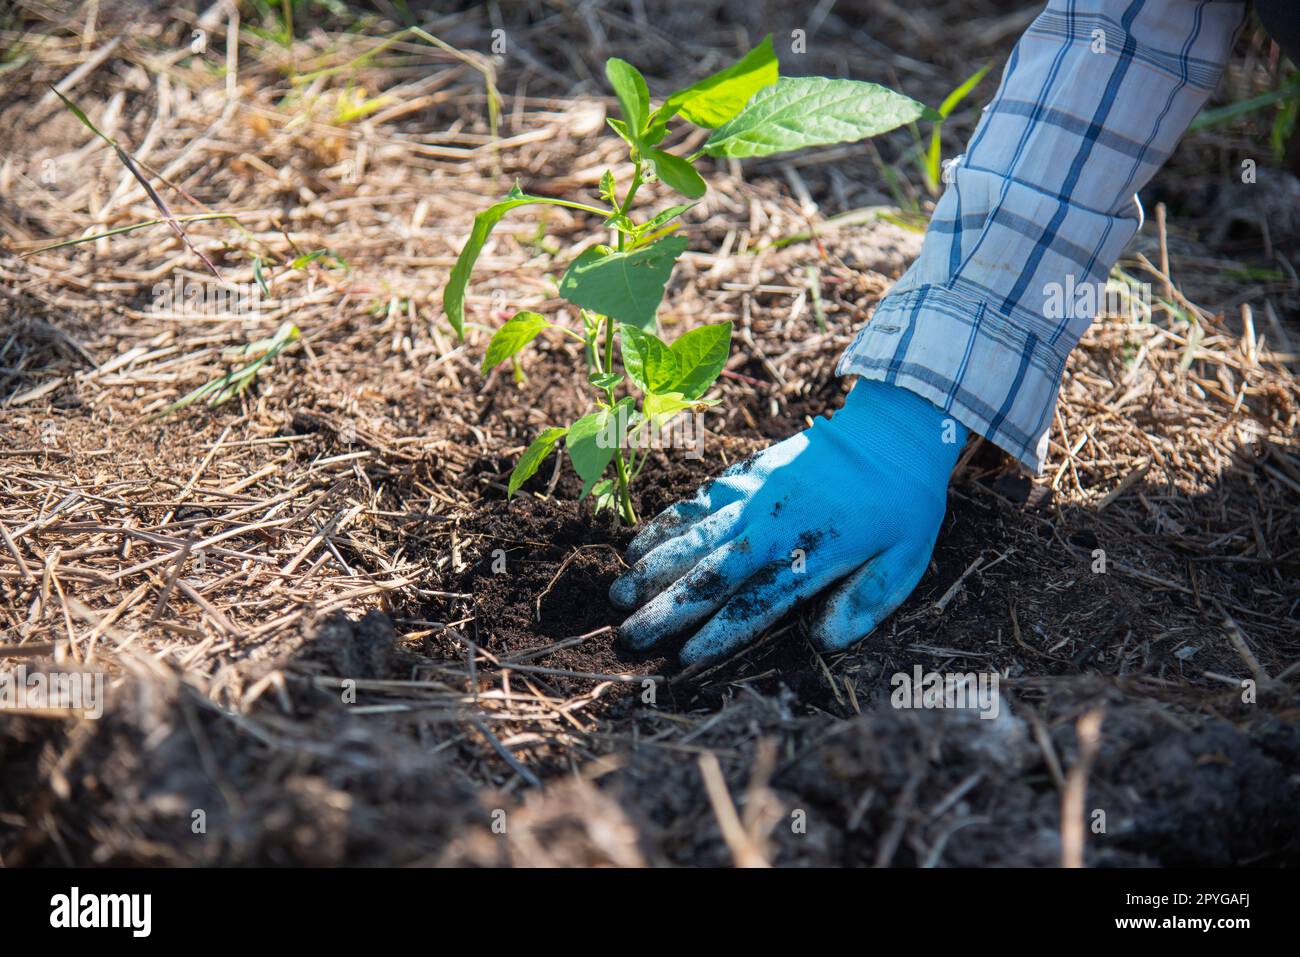 concept of hand planting trees increases oxygen and helps reduce global warming. Stock Photo